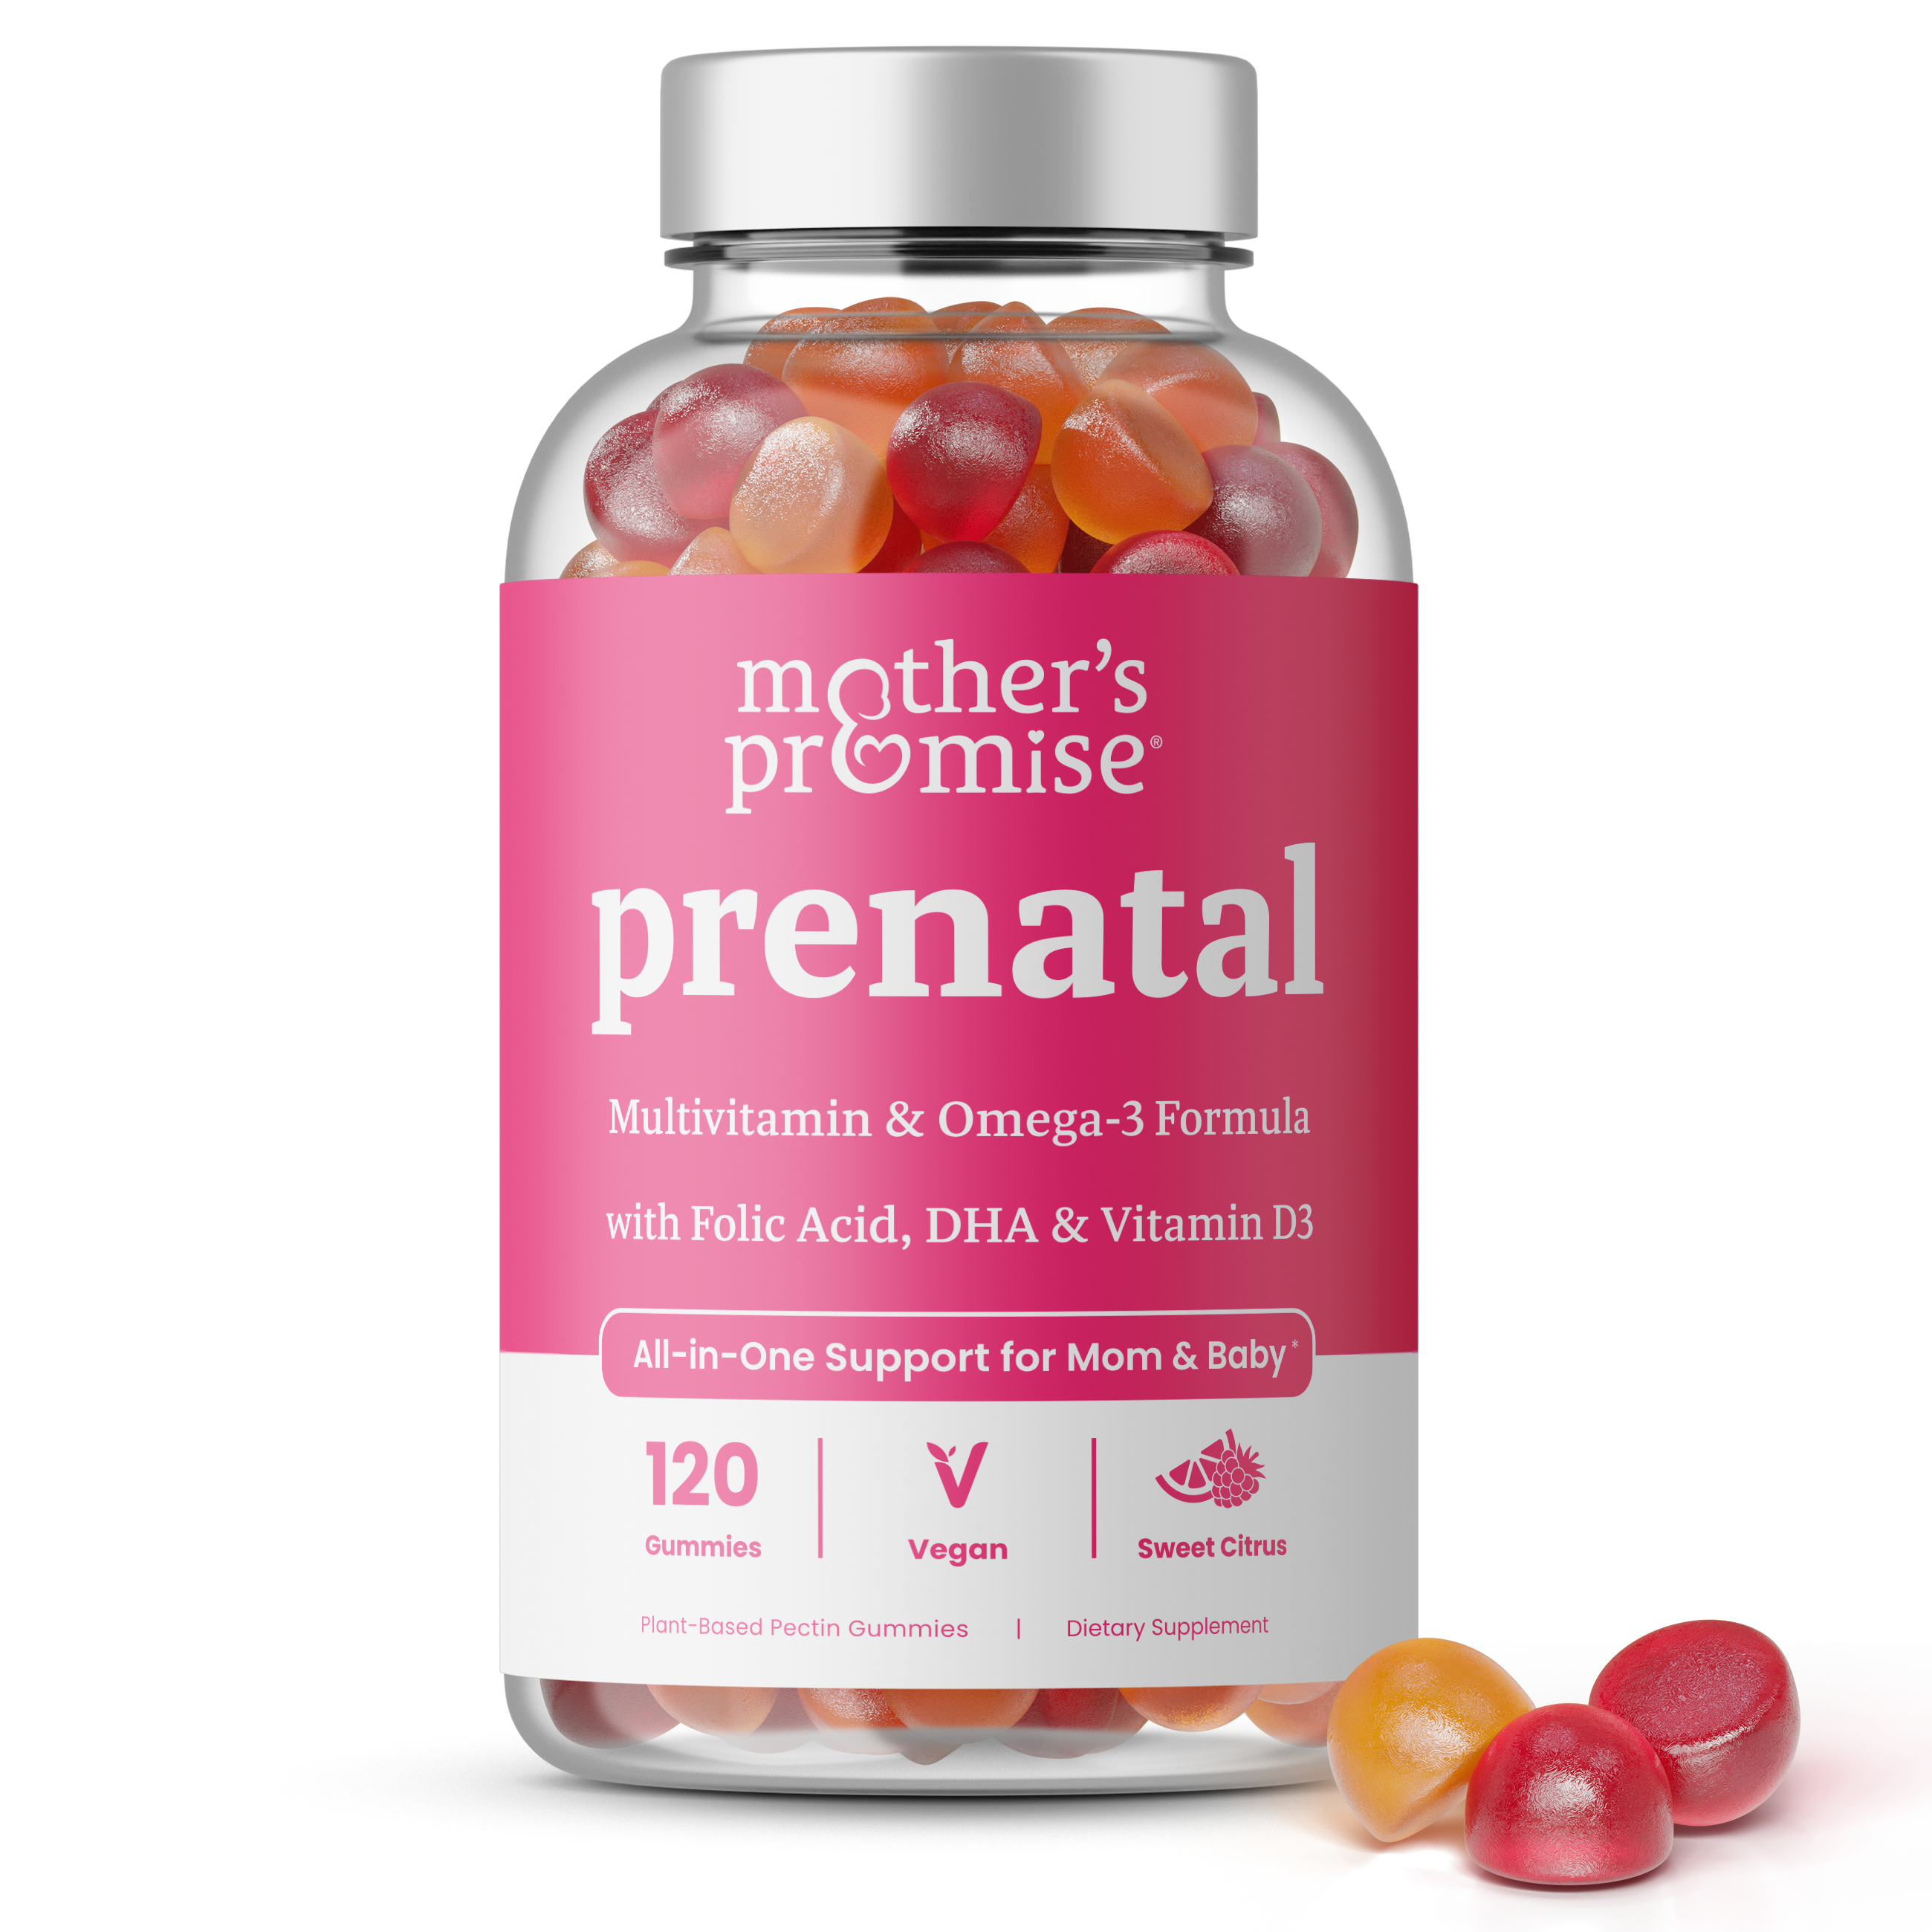 Mother's Promise Prenatal Vitamin Gummies with DHA and Folic Acid | Vegan Prenatal Vitamins for Women with Omega 3, Folate & D3, Pregnancy Vitamins for Fetal Development | Gummy Multivitamin Supplement, 120 Count